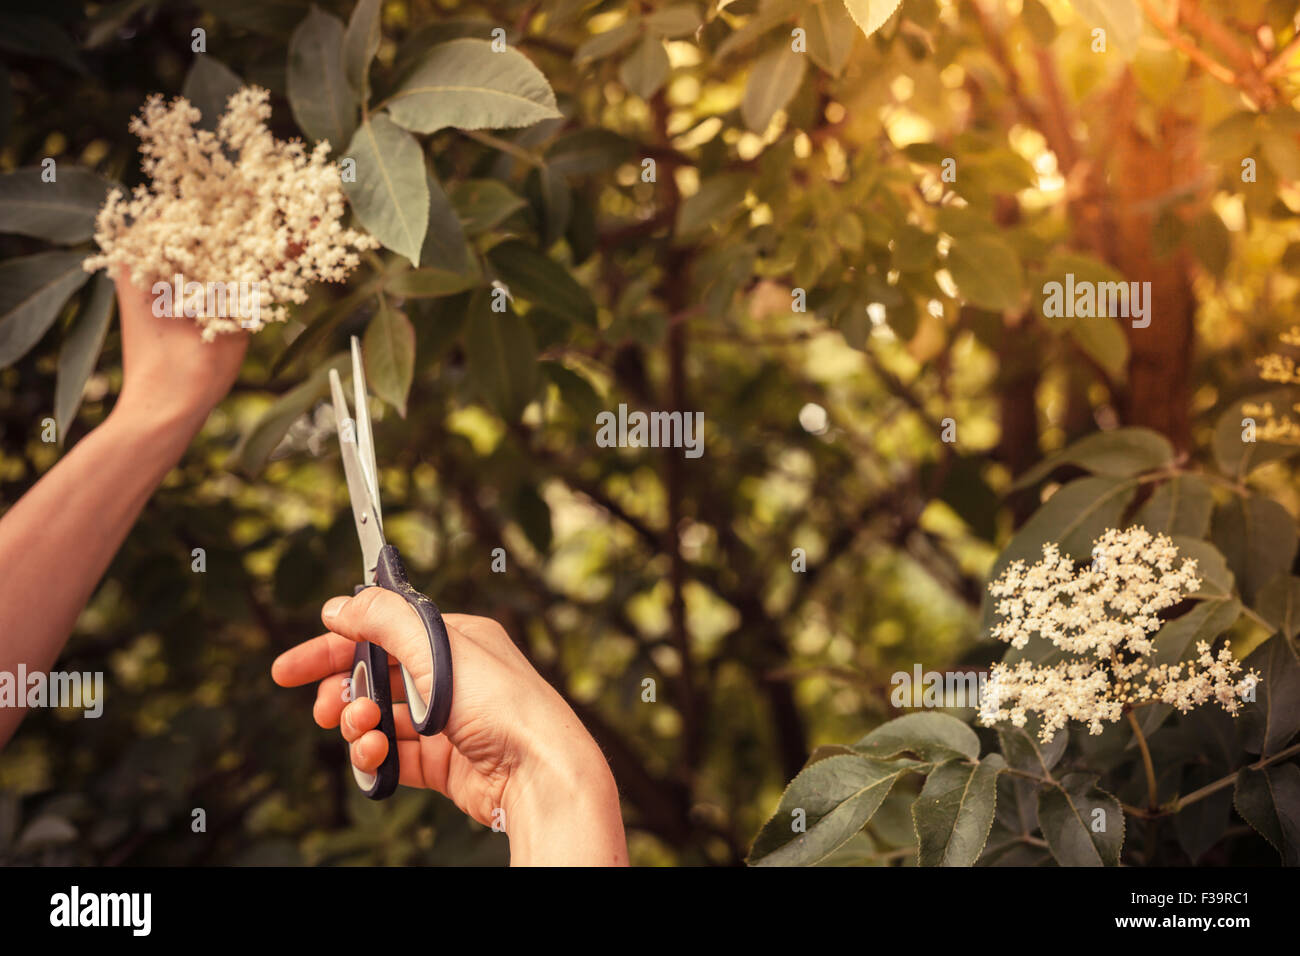 A young woman is cutting elderflowers from a tree with scissors Stock Photo